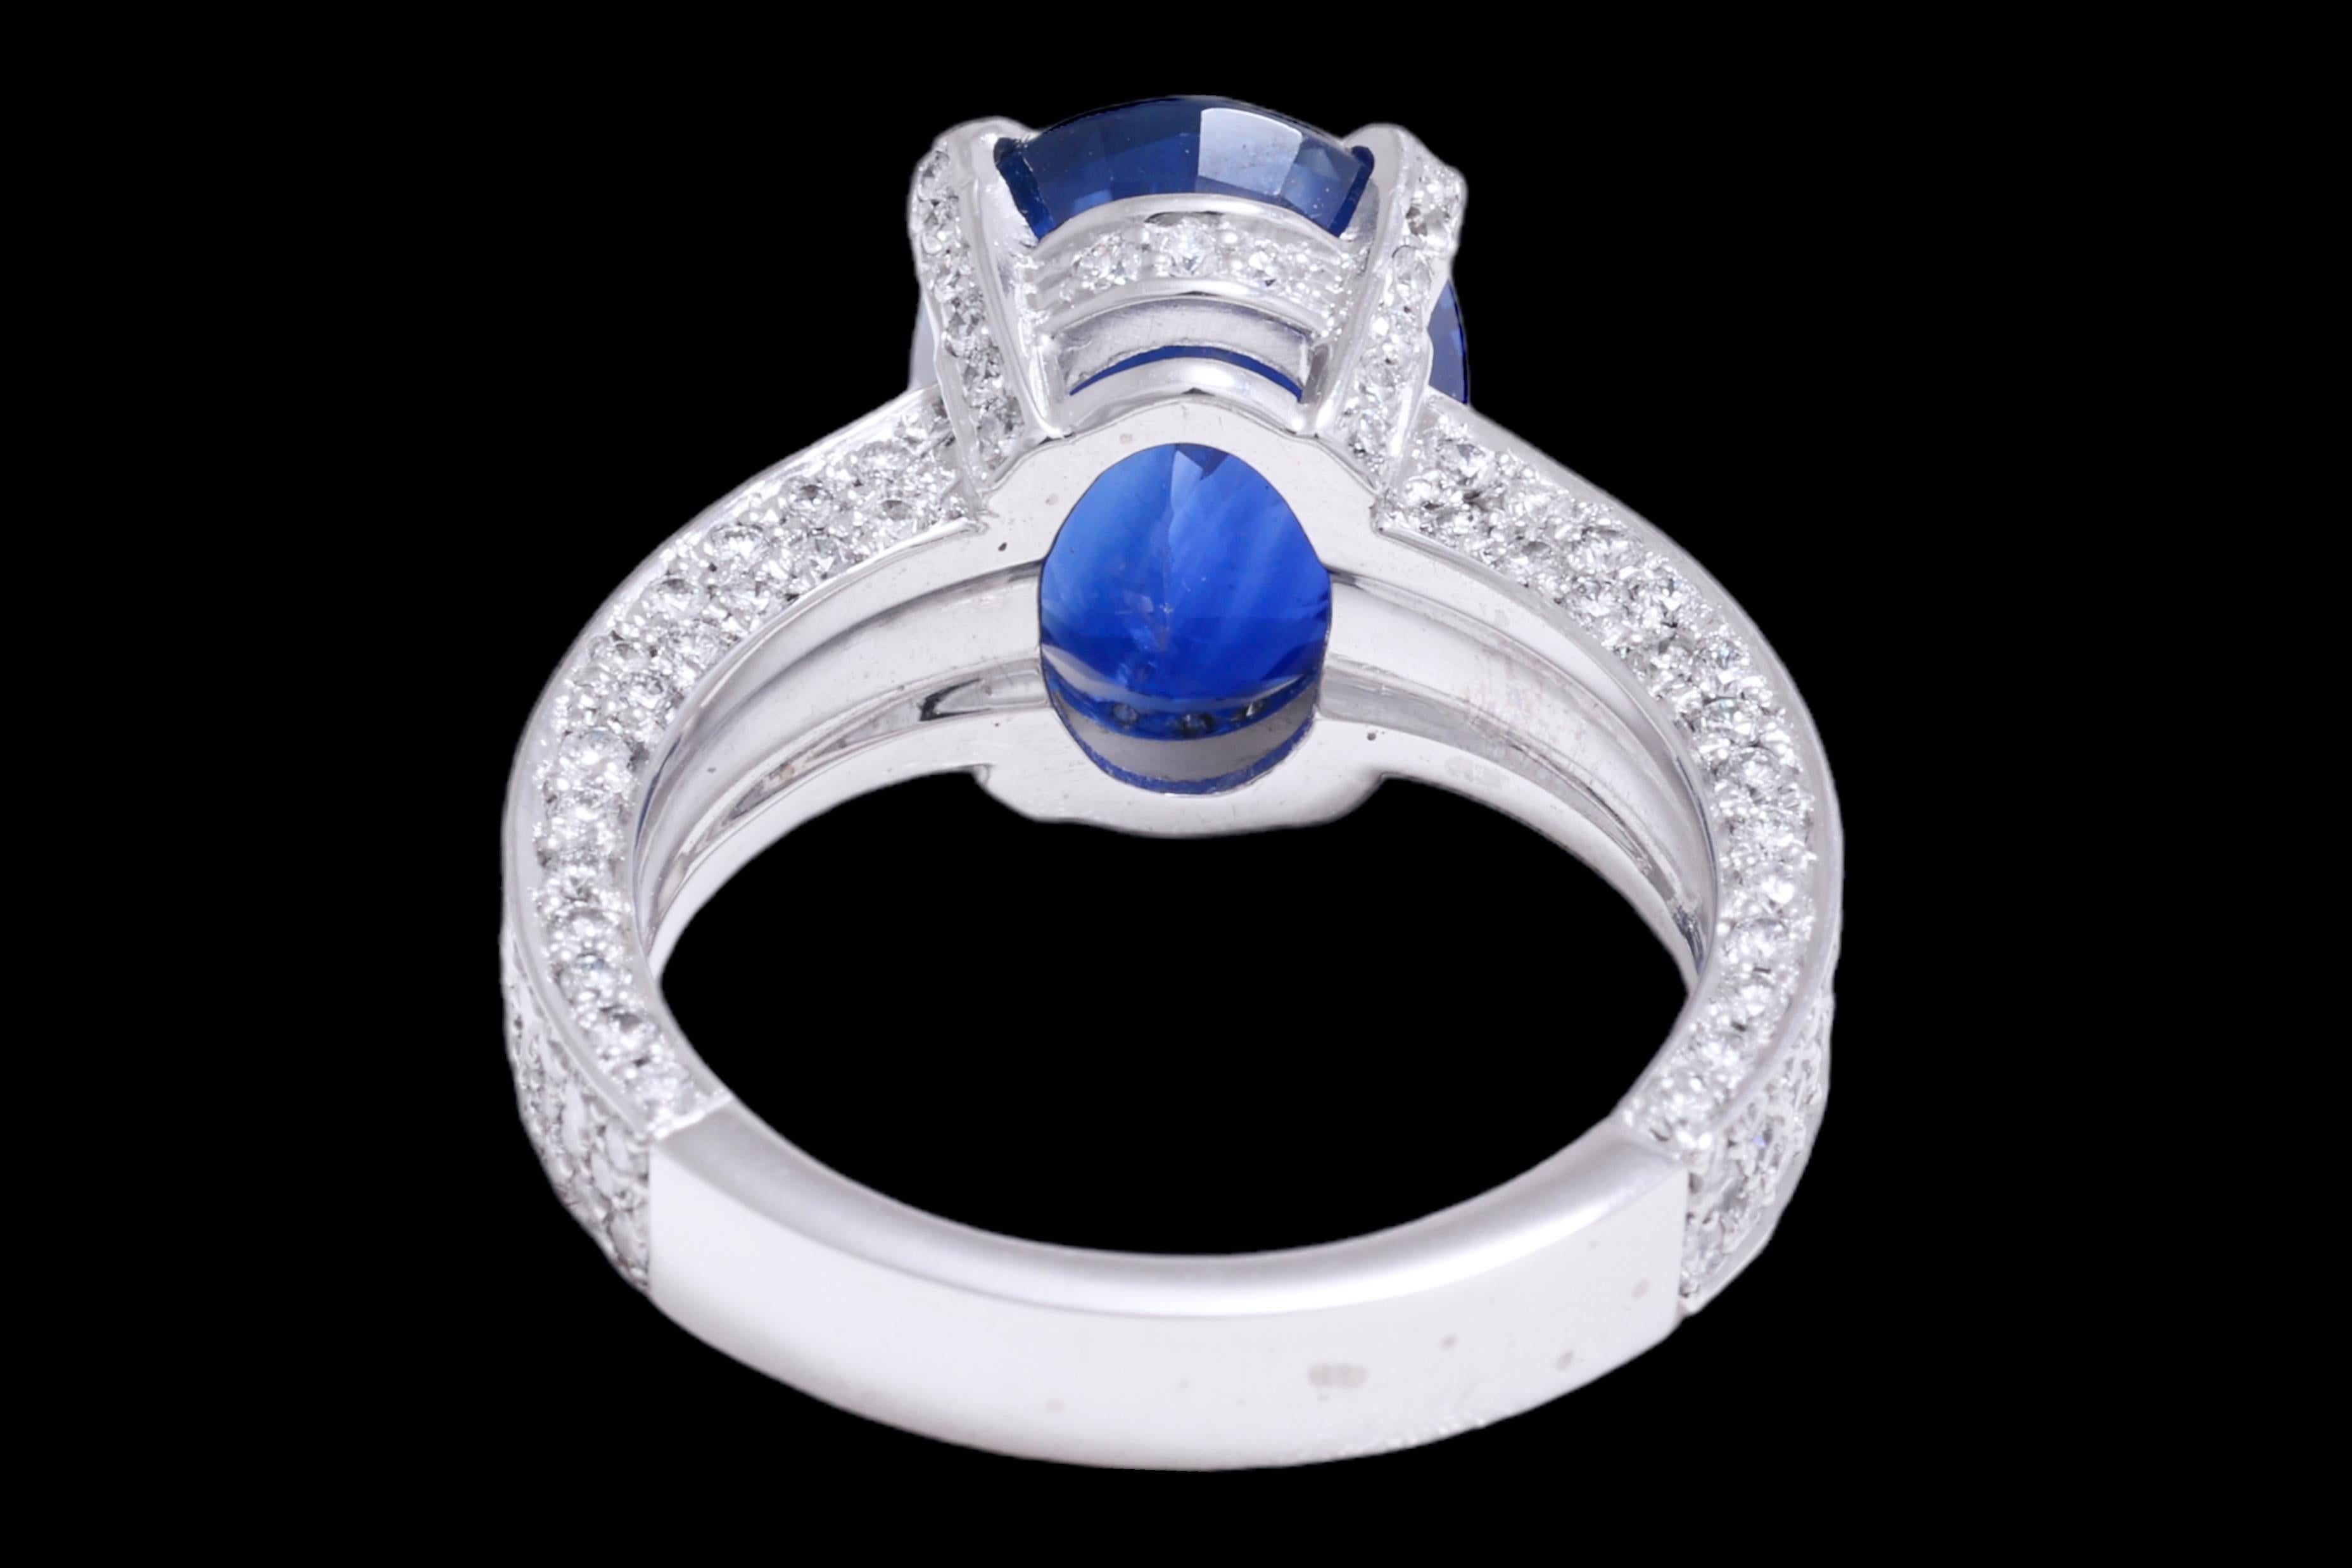  AGL Certified 18kt. White Gold Ring 6.32 ct. Ceylon Sapphire &1.62 ct. Diamonds For Sale 1